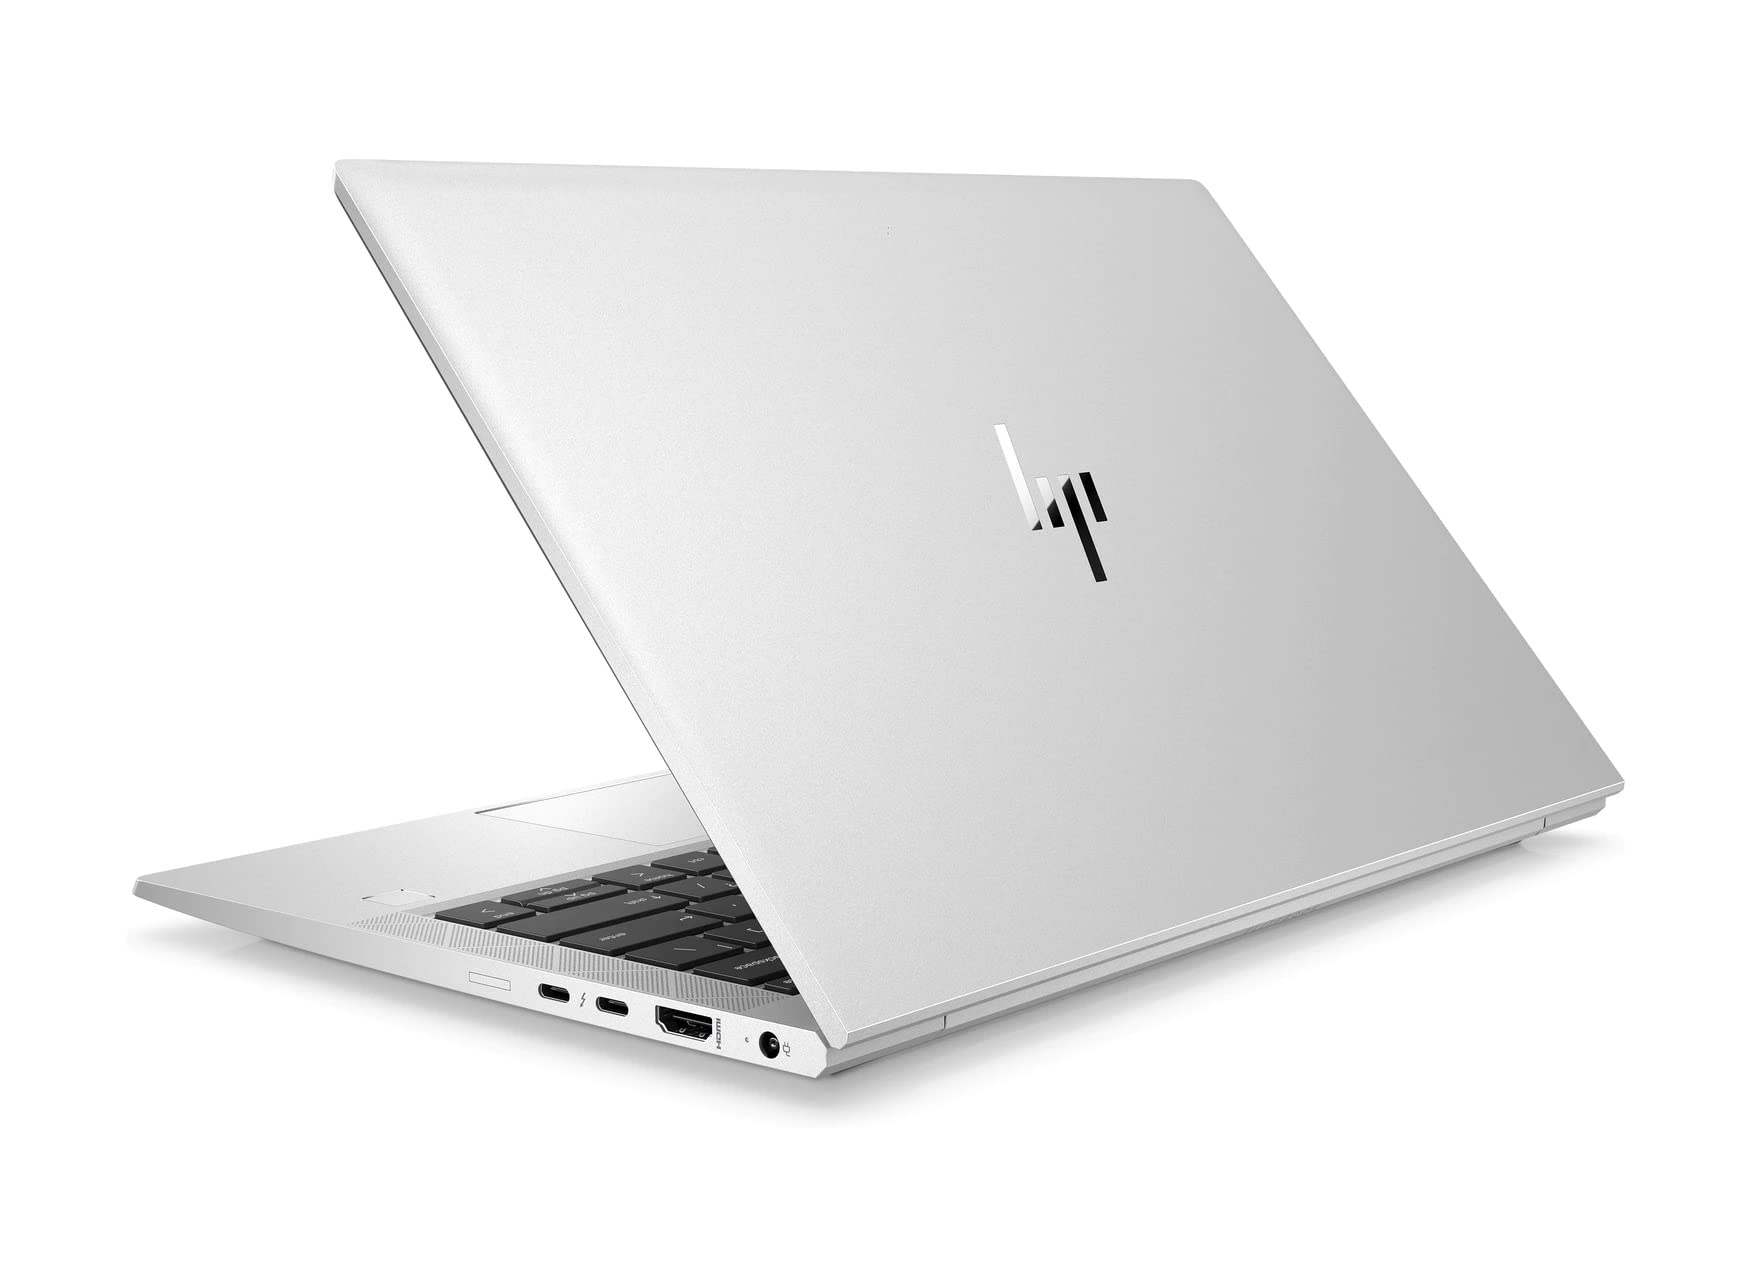 Copy of HP EliteBook 830 G8 13.3" FHD Laptop with HP Sure View Privacy Screen - Core i7 1185G7, 16GB DDR4, 512GB SSD, WIFI 6 & BT 5.2, Smart Card and Fingerprint Reader, Free upgrade to Windows 11 - Plain Box